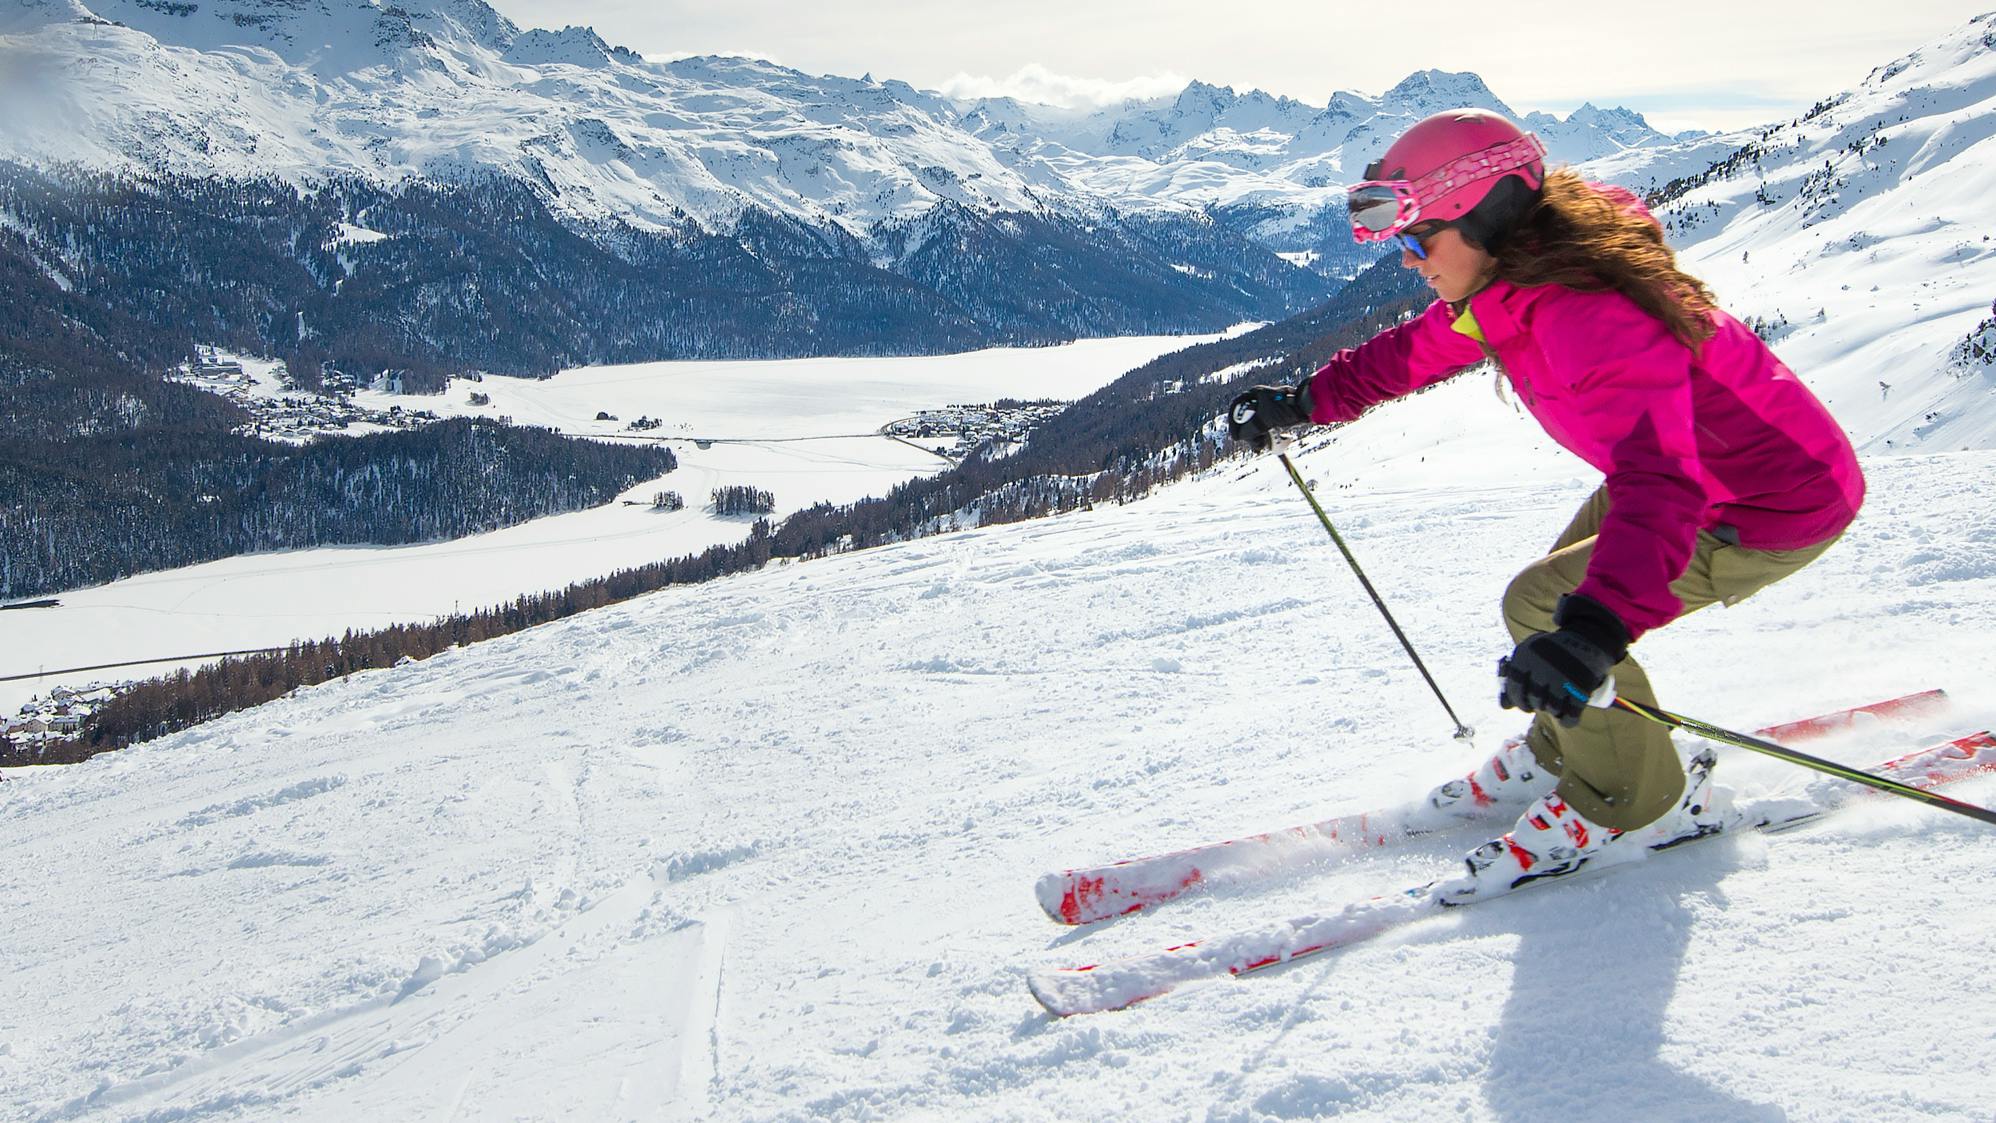 A woman skier turning down a ski slope. 